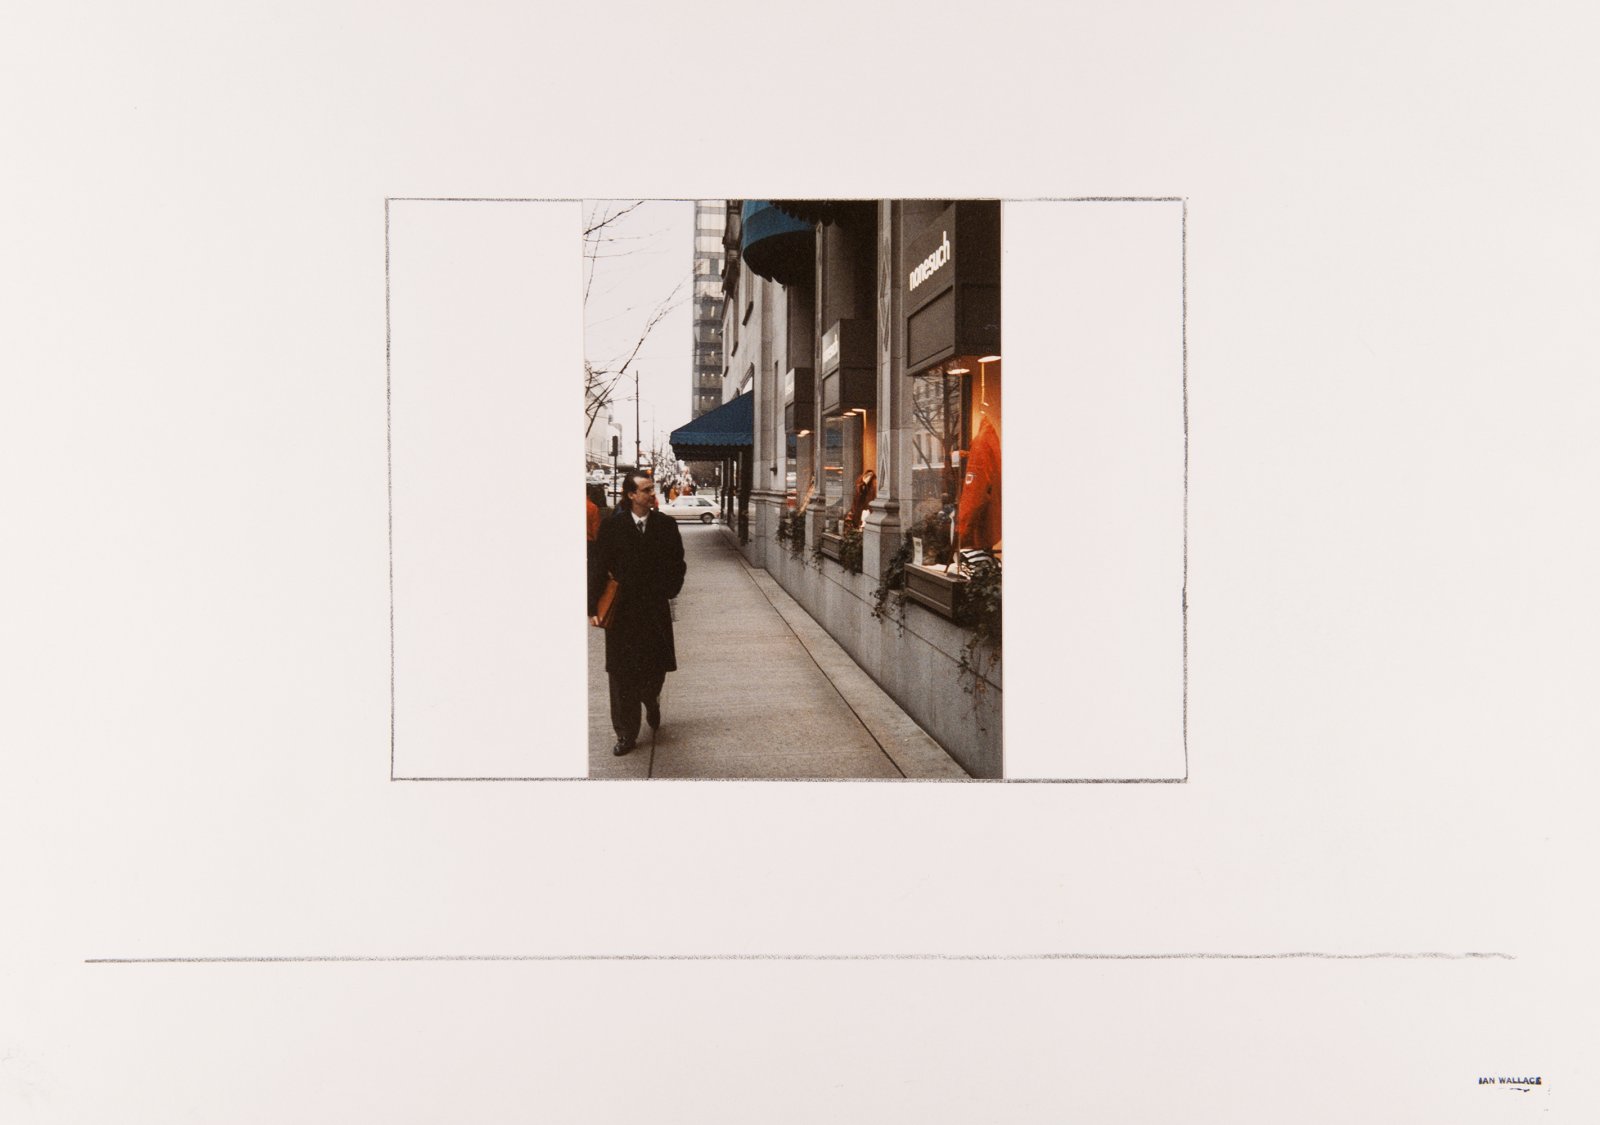 Ian Wallace, 10 studies for My Heroes in the Street (1986), 1986, 10 lithographs and colour photographs on paper, 15 x 22 in. (39 x 56 cm)